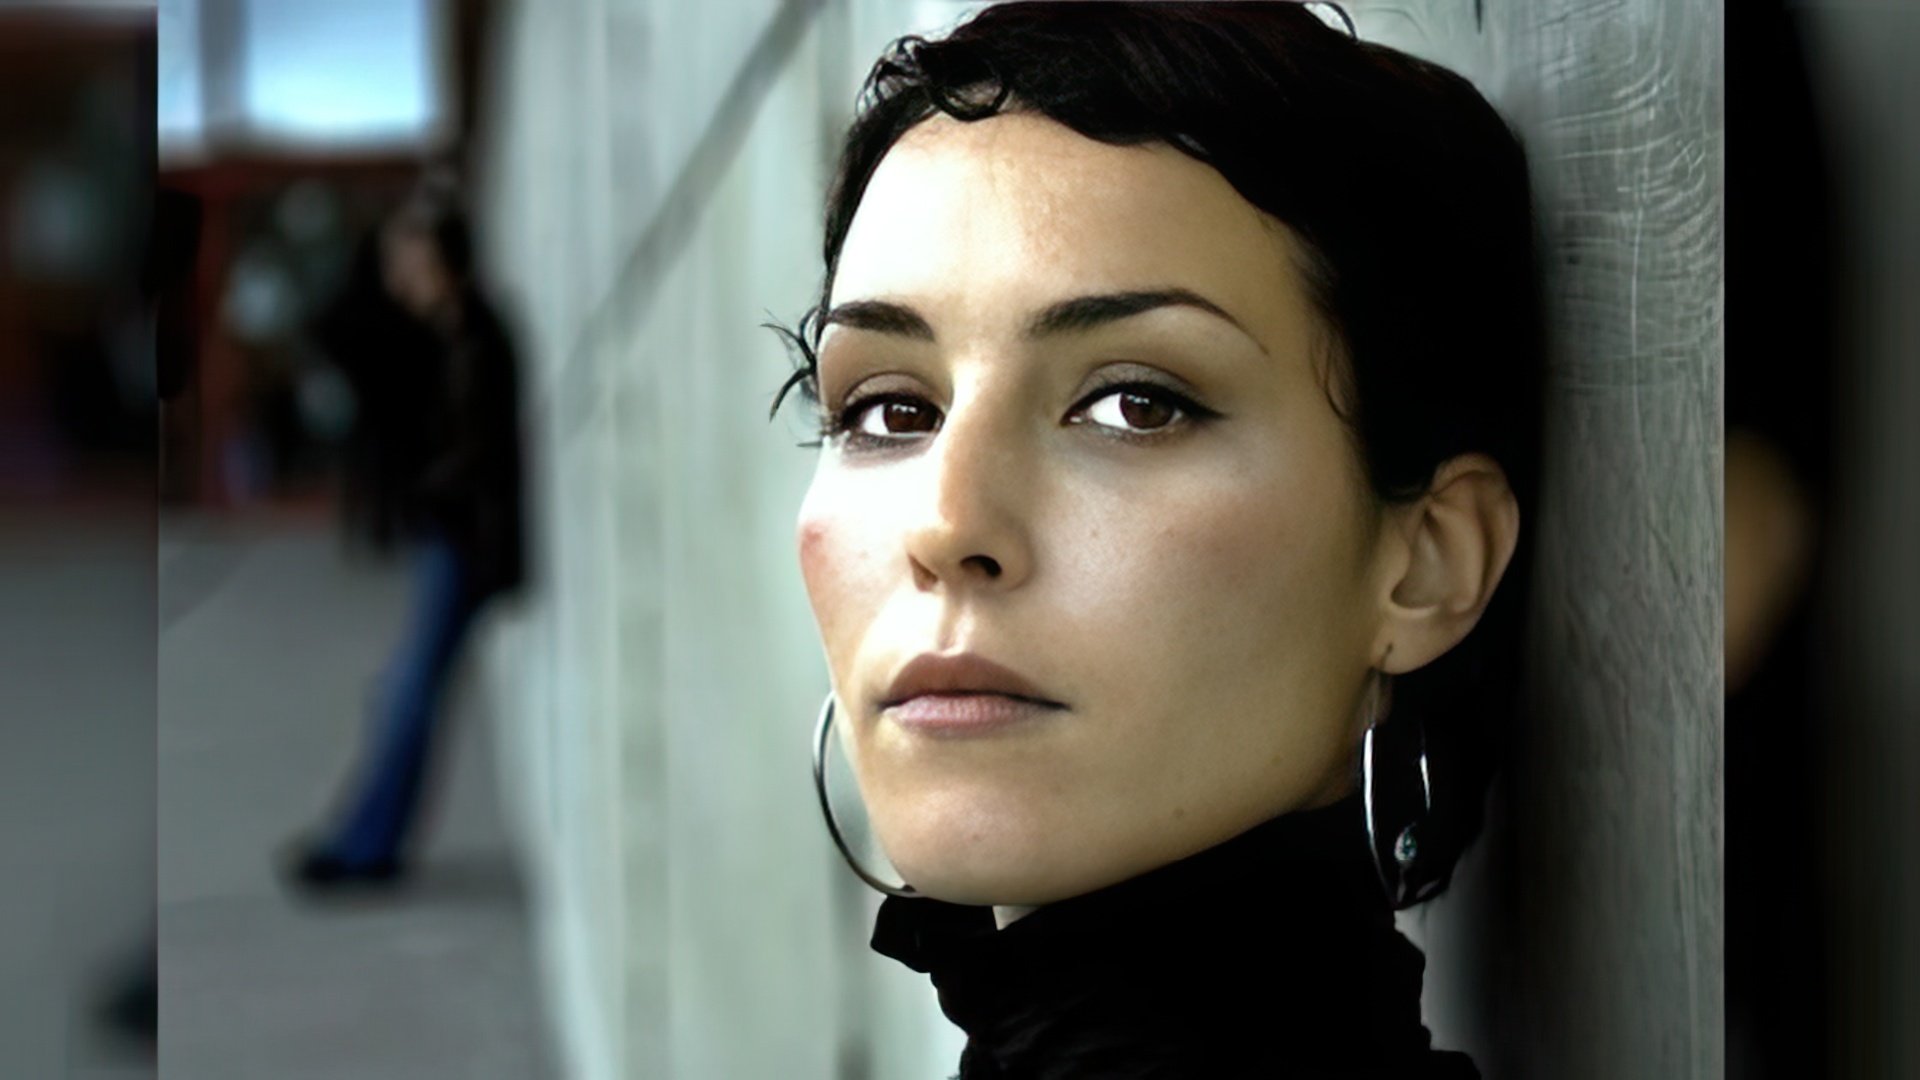 Noomi was a difficult teenager